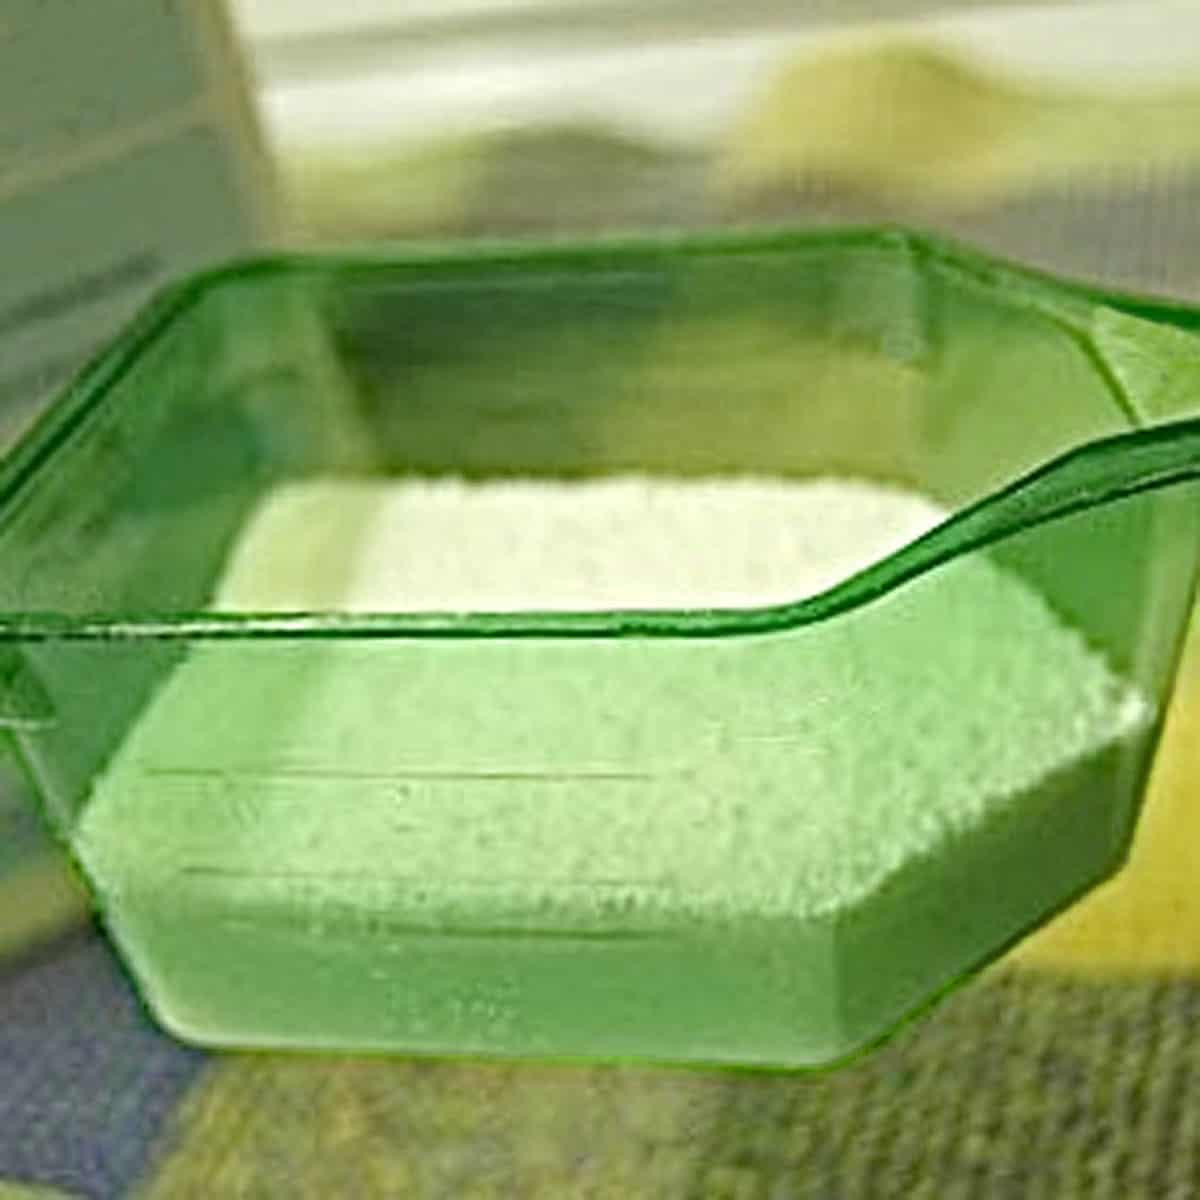 A green scoop partially filled with laundry detergent.